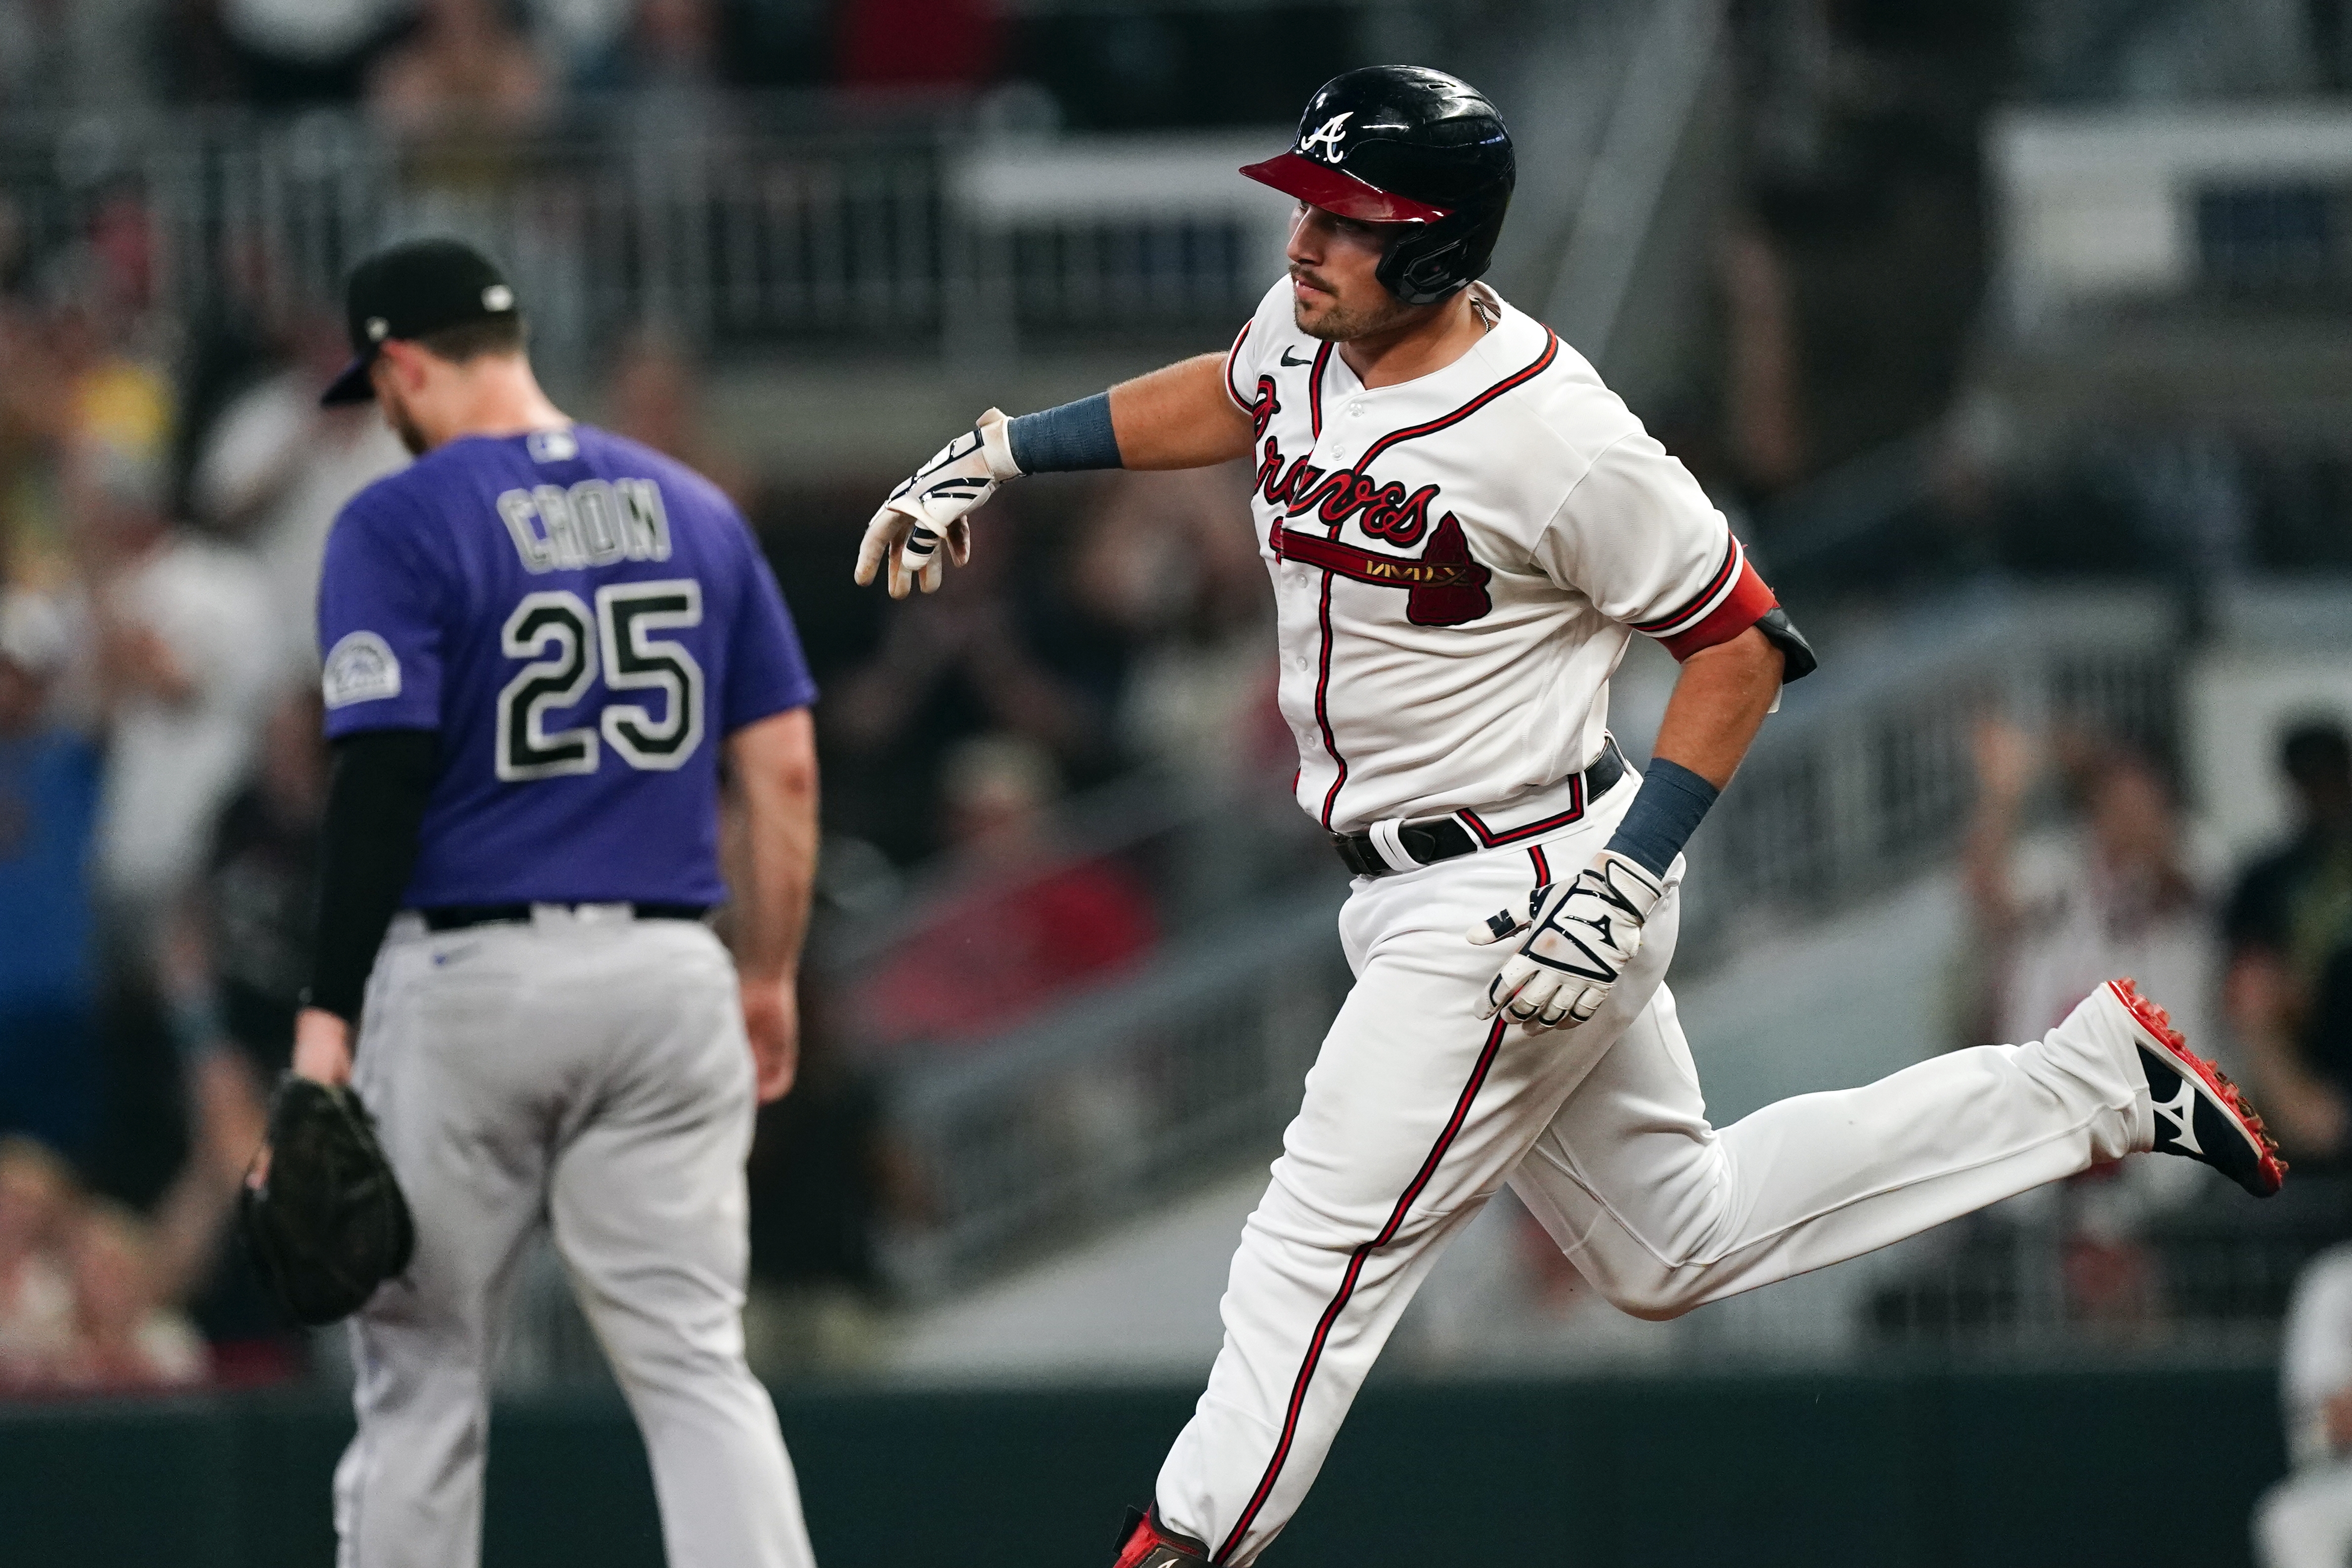 Braves rookie Strider fans Atlanta record 16 in win over Rox – KGET 17